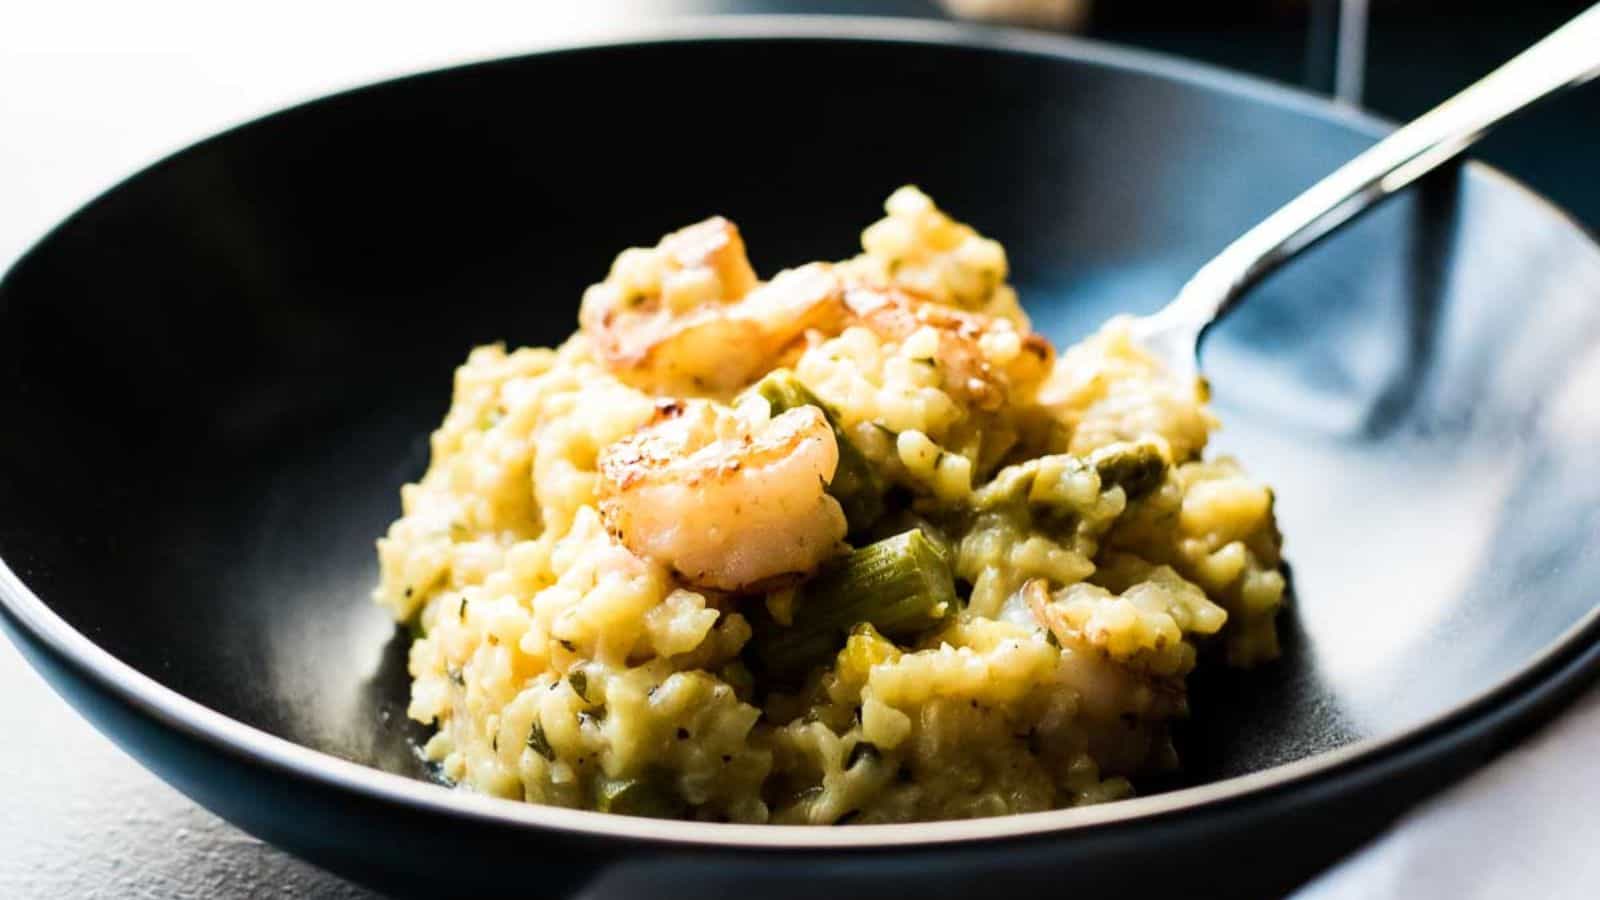 Shrimp asparagus risotto in a dark bowl on a blue background with a napkin and glass of wine.